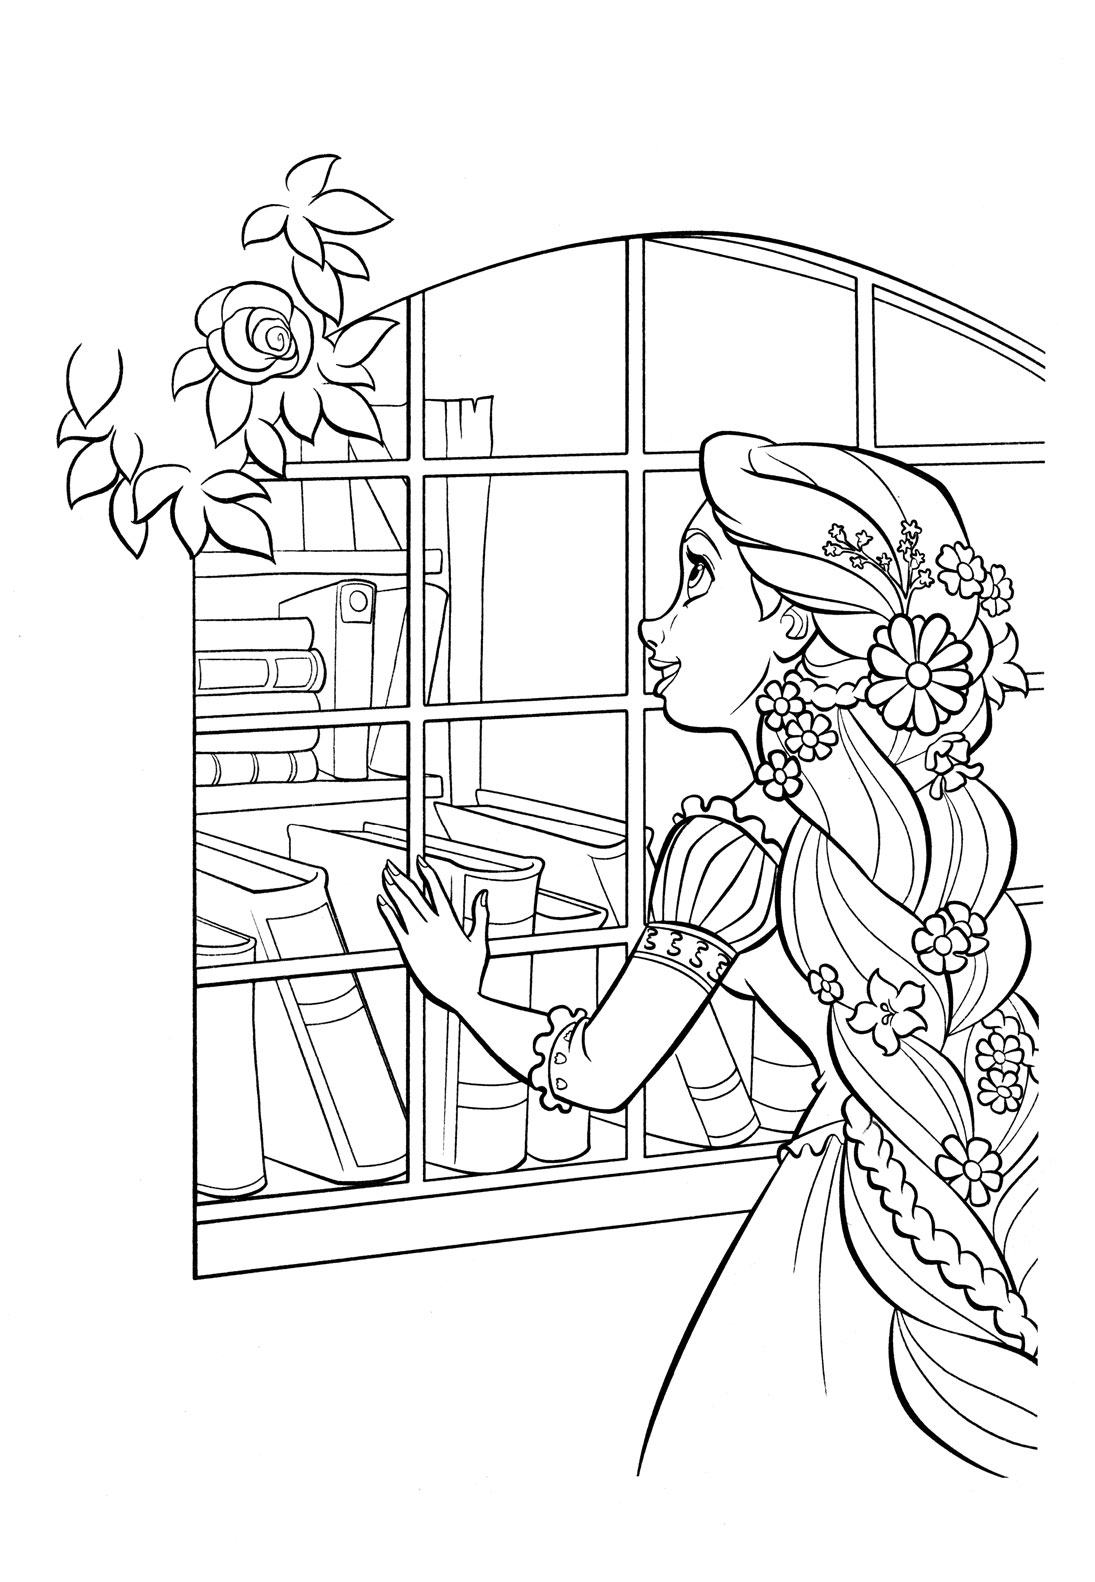 rapunzel coloring pages best coloring pages for kids get this